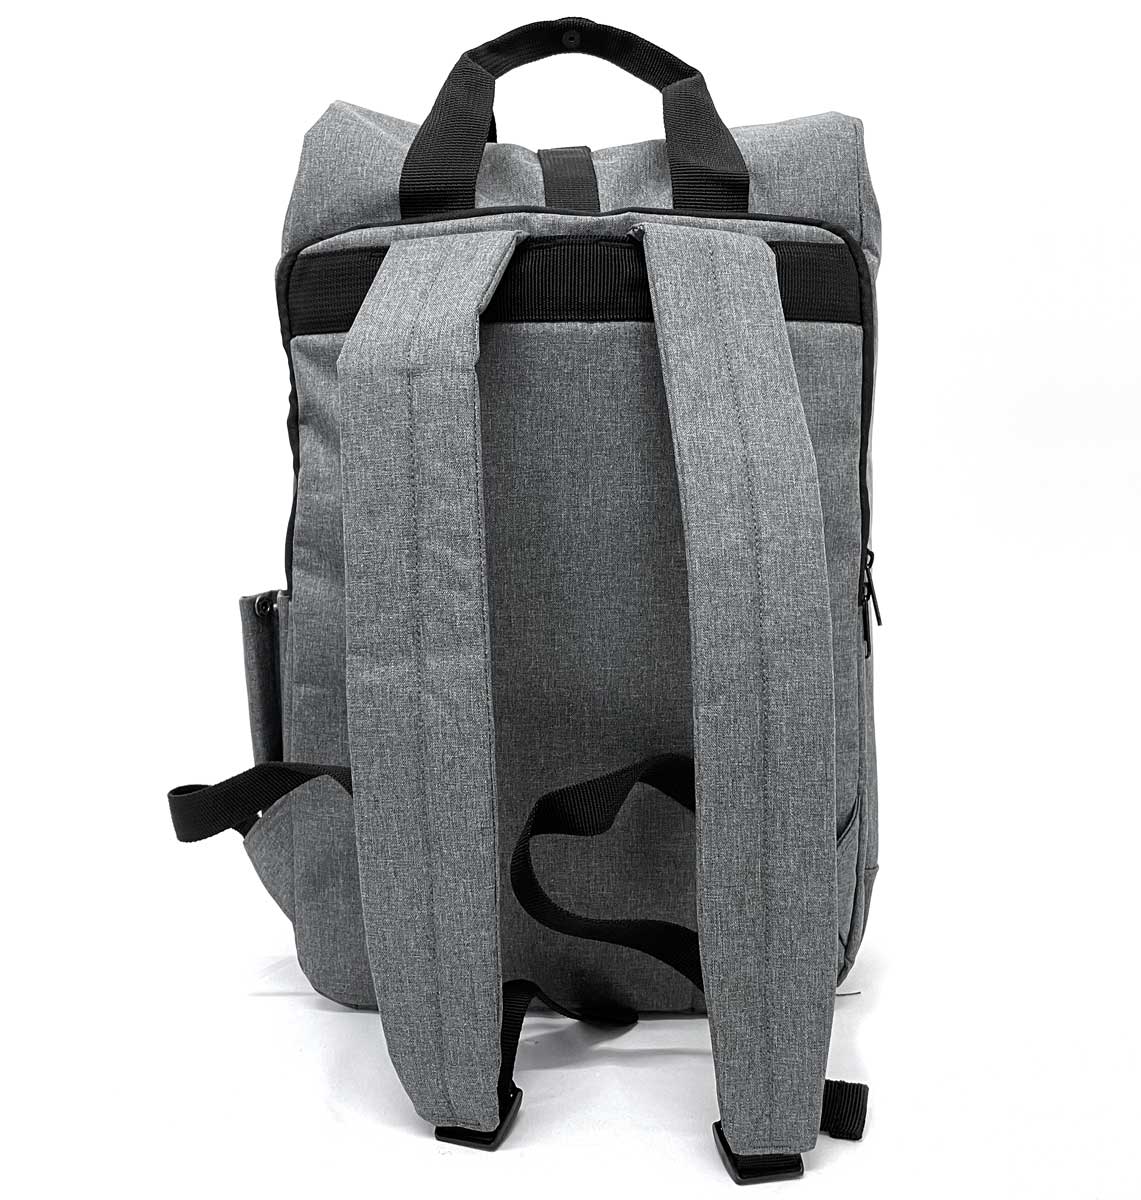 Elephant Large Roll-top Laptop Recycled Backpack - Blue Panda